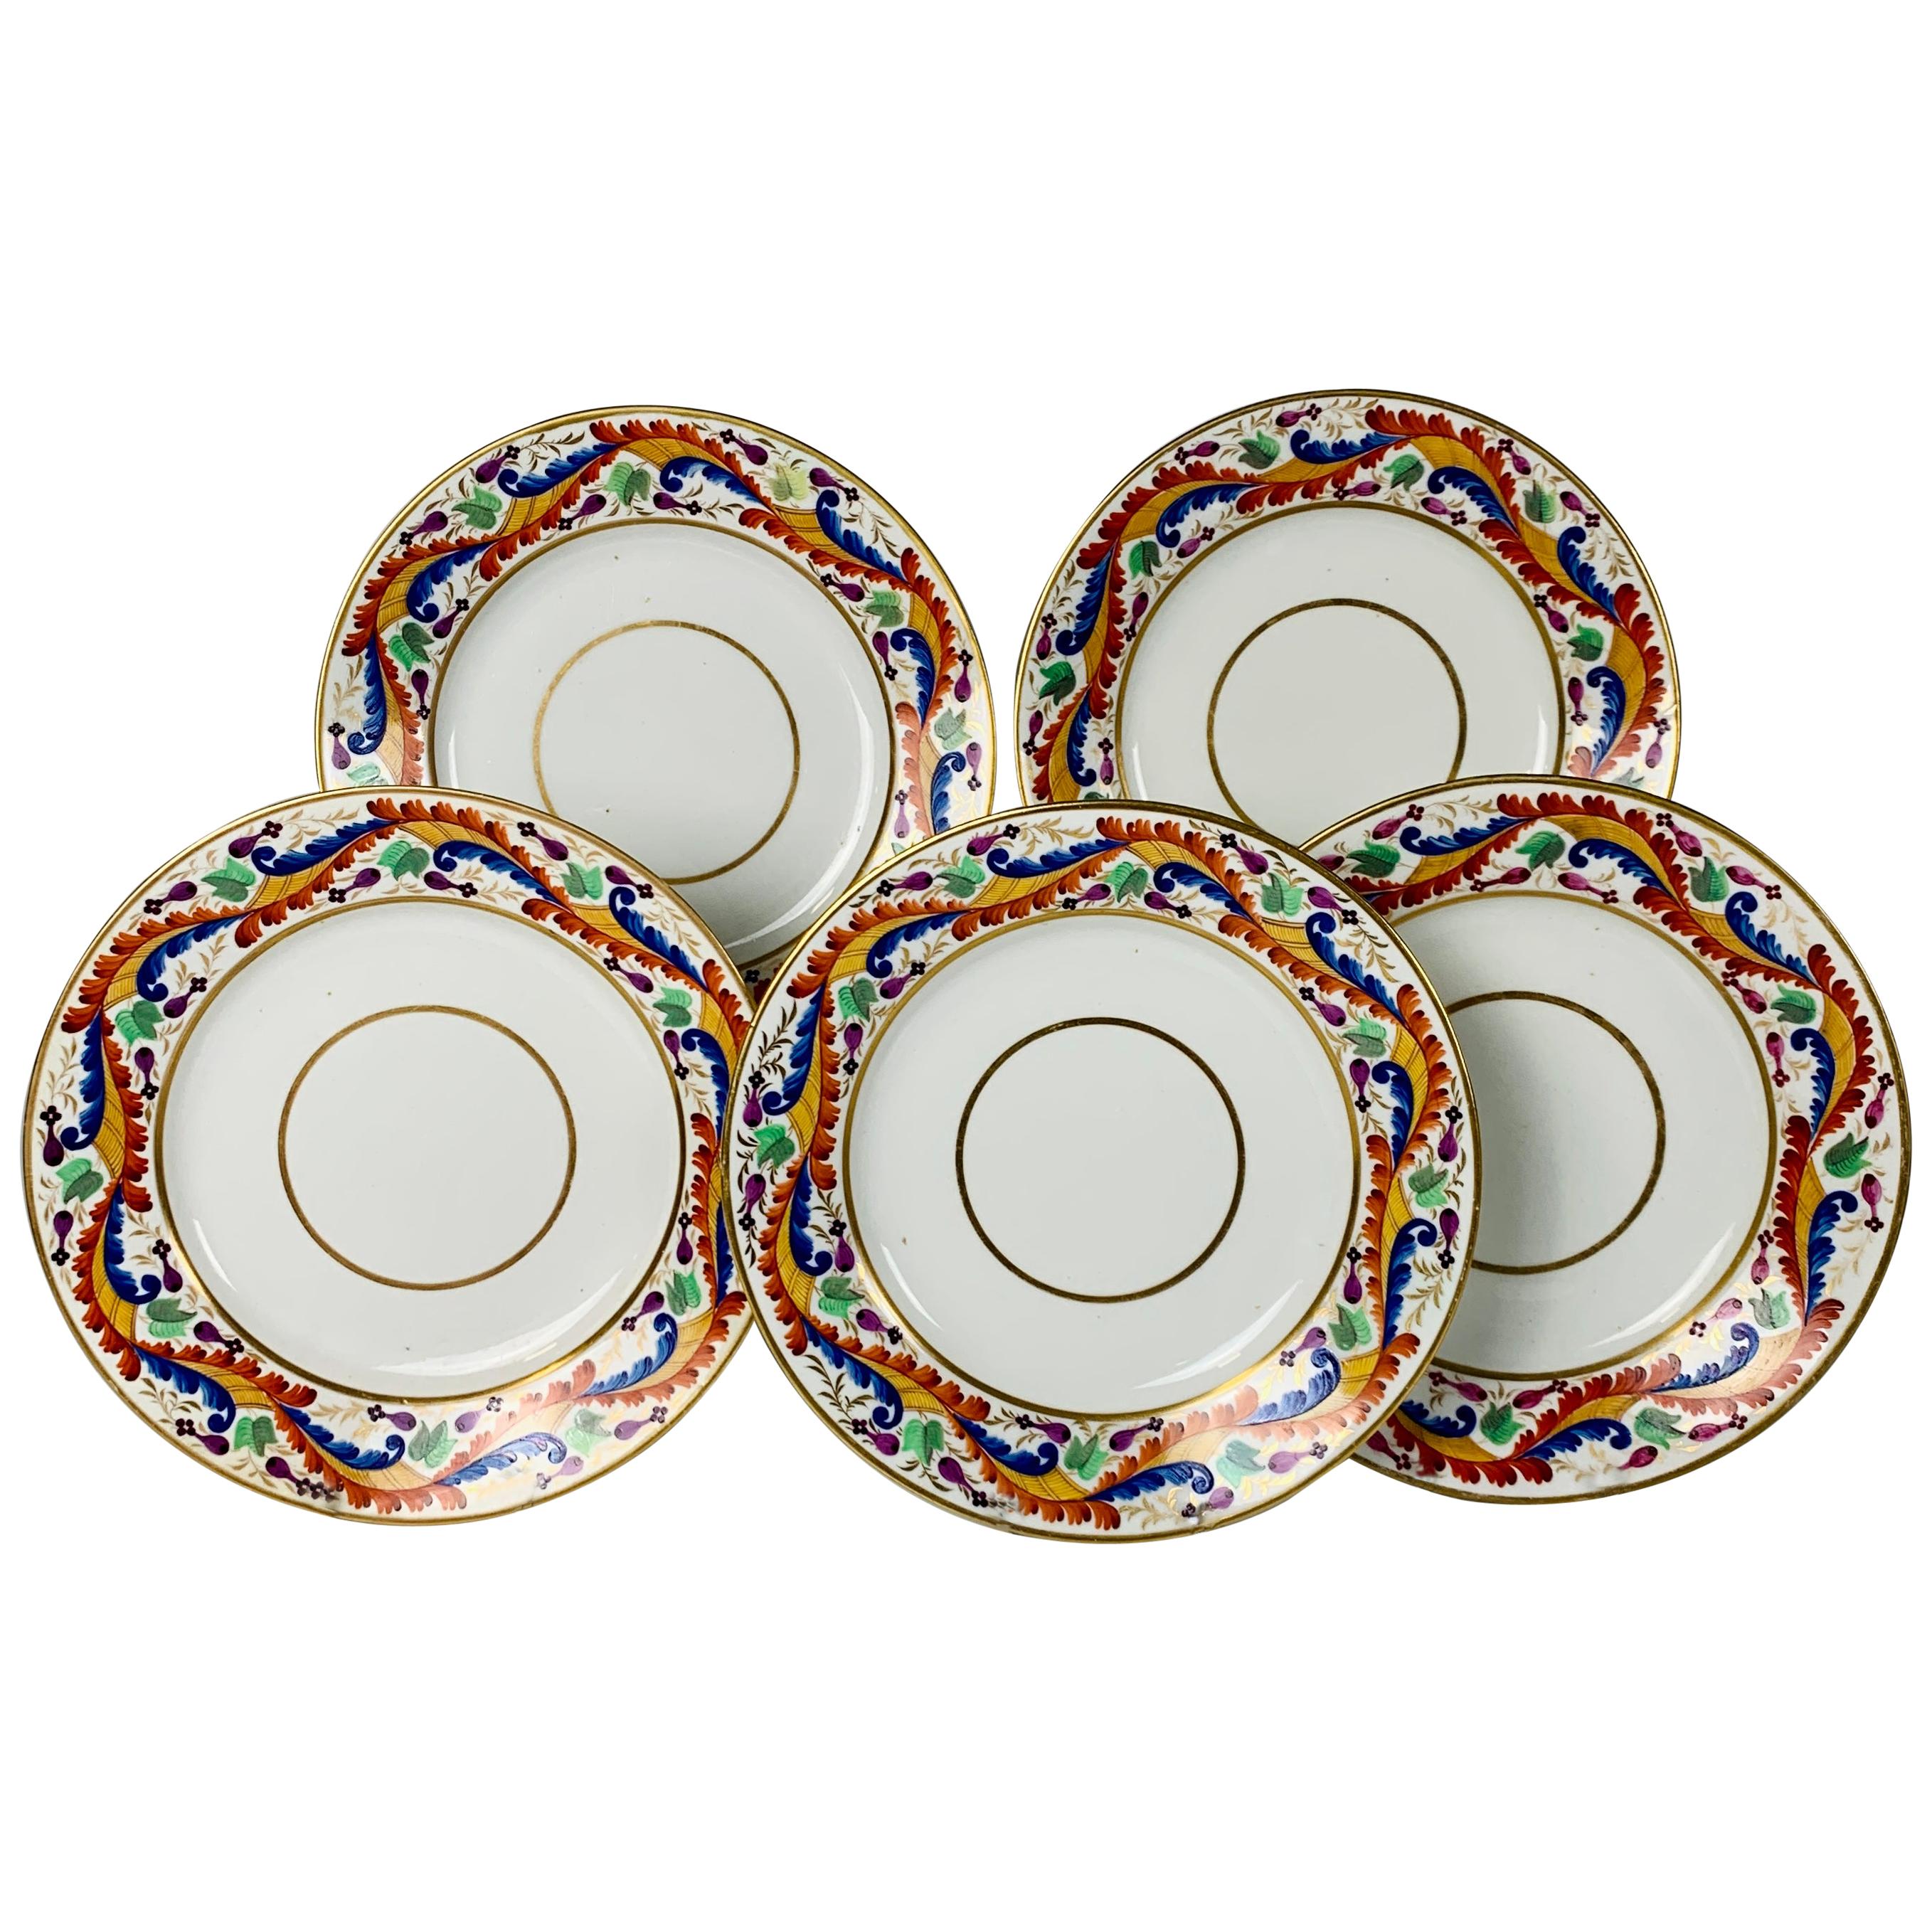 Set of Five Derby Dishes Hand-Painted in England, circa 1810